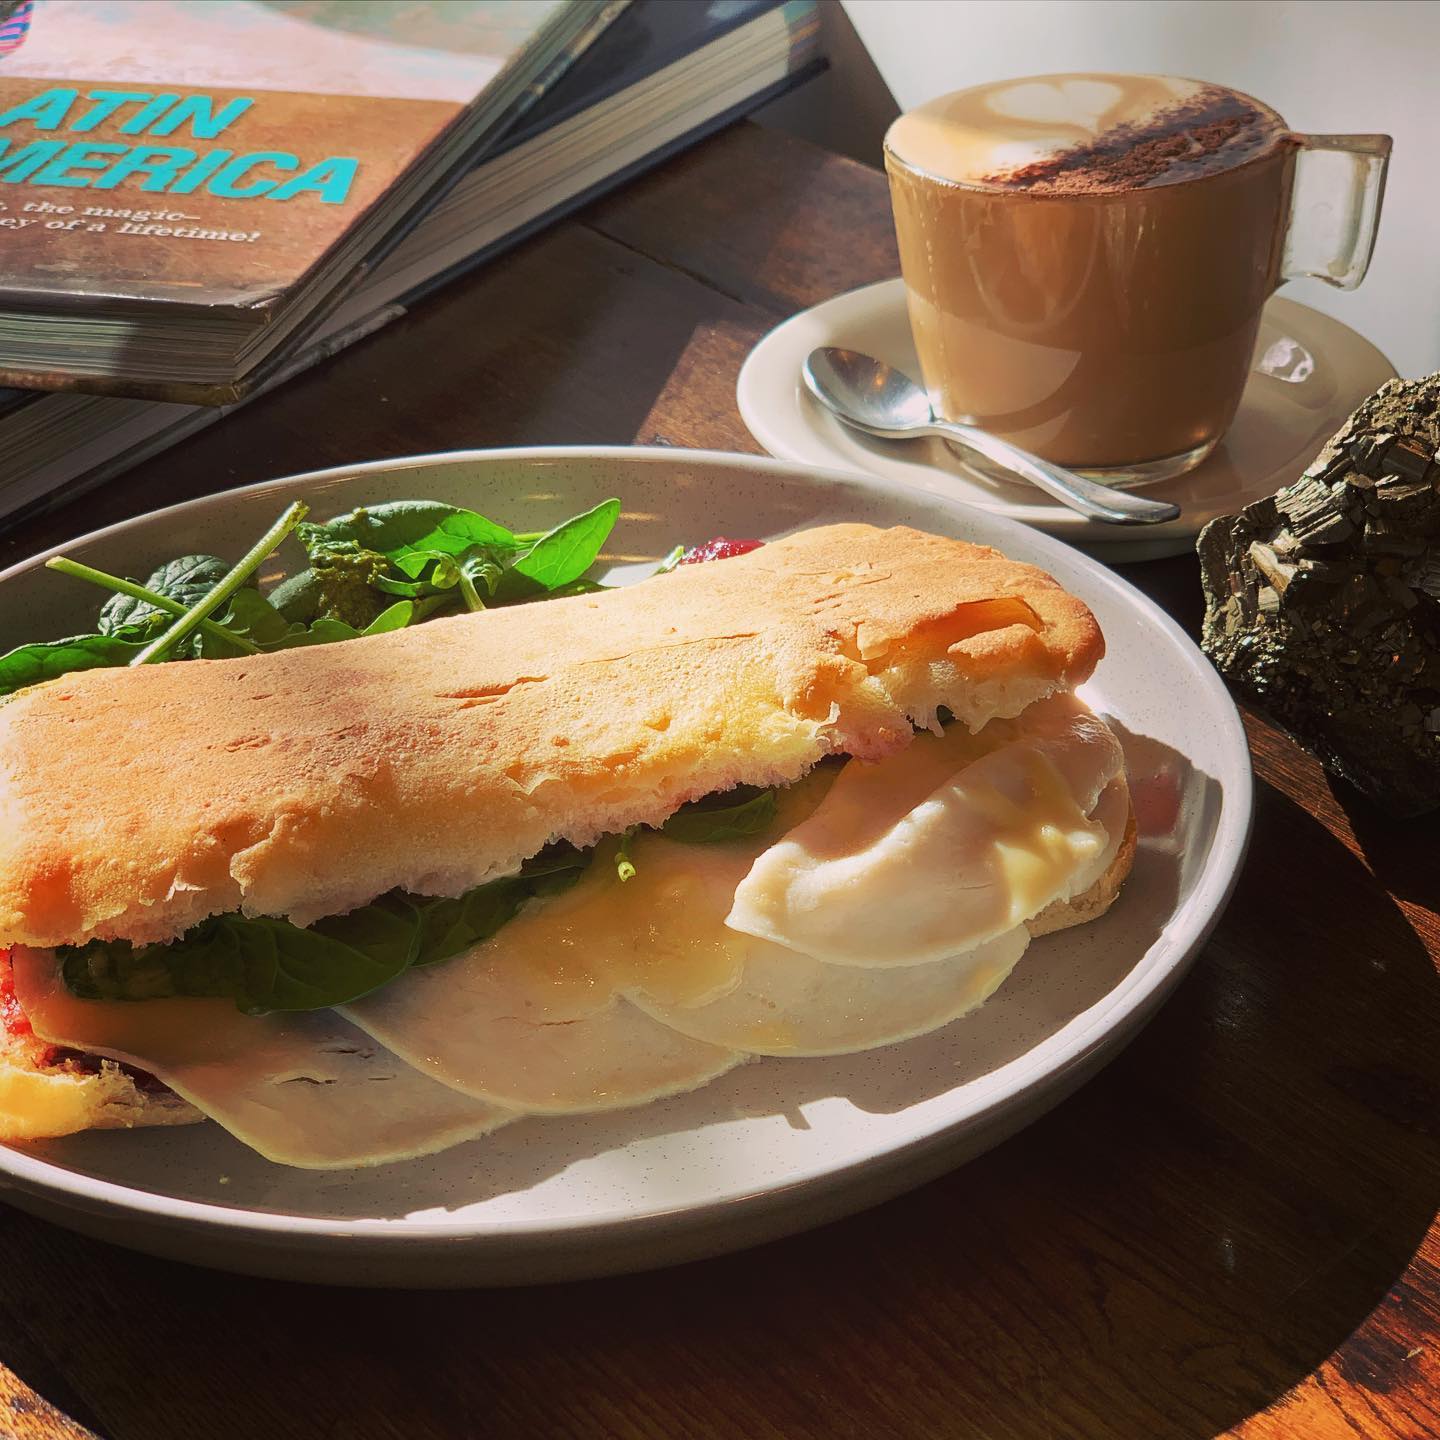 Sandwich and coffee from Sussa in East Perth